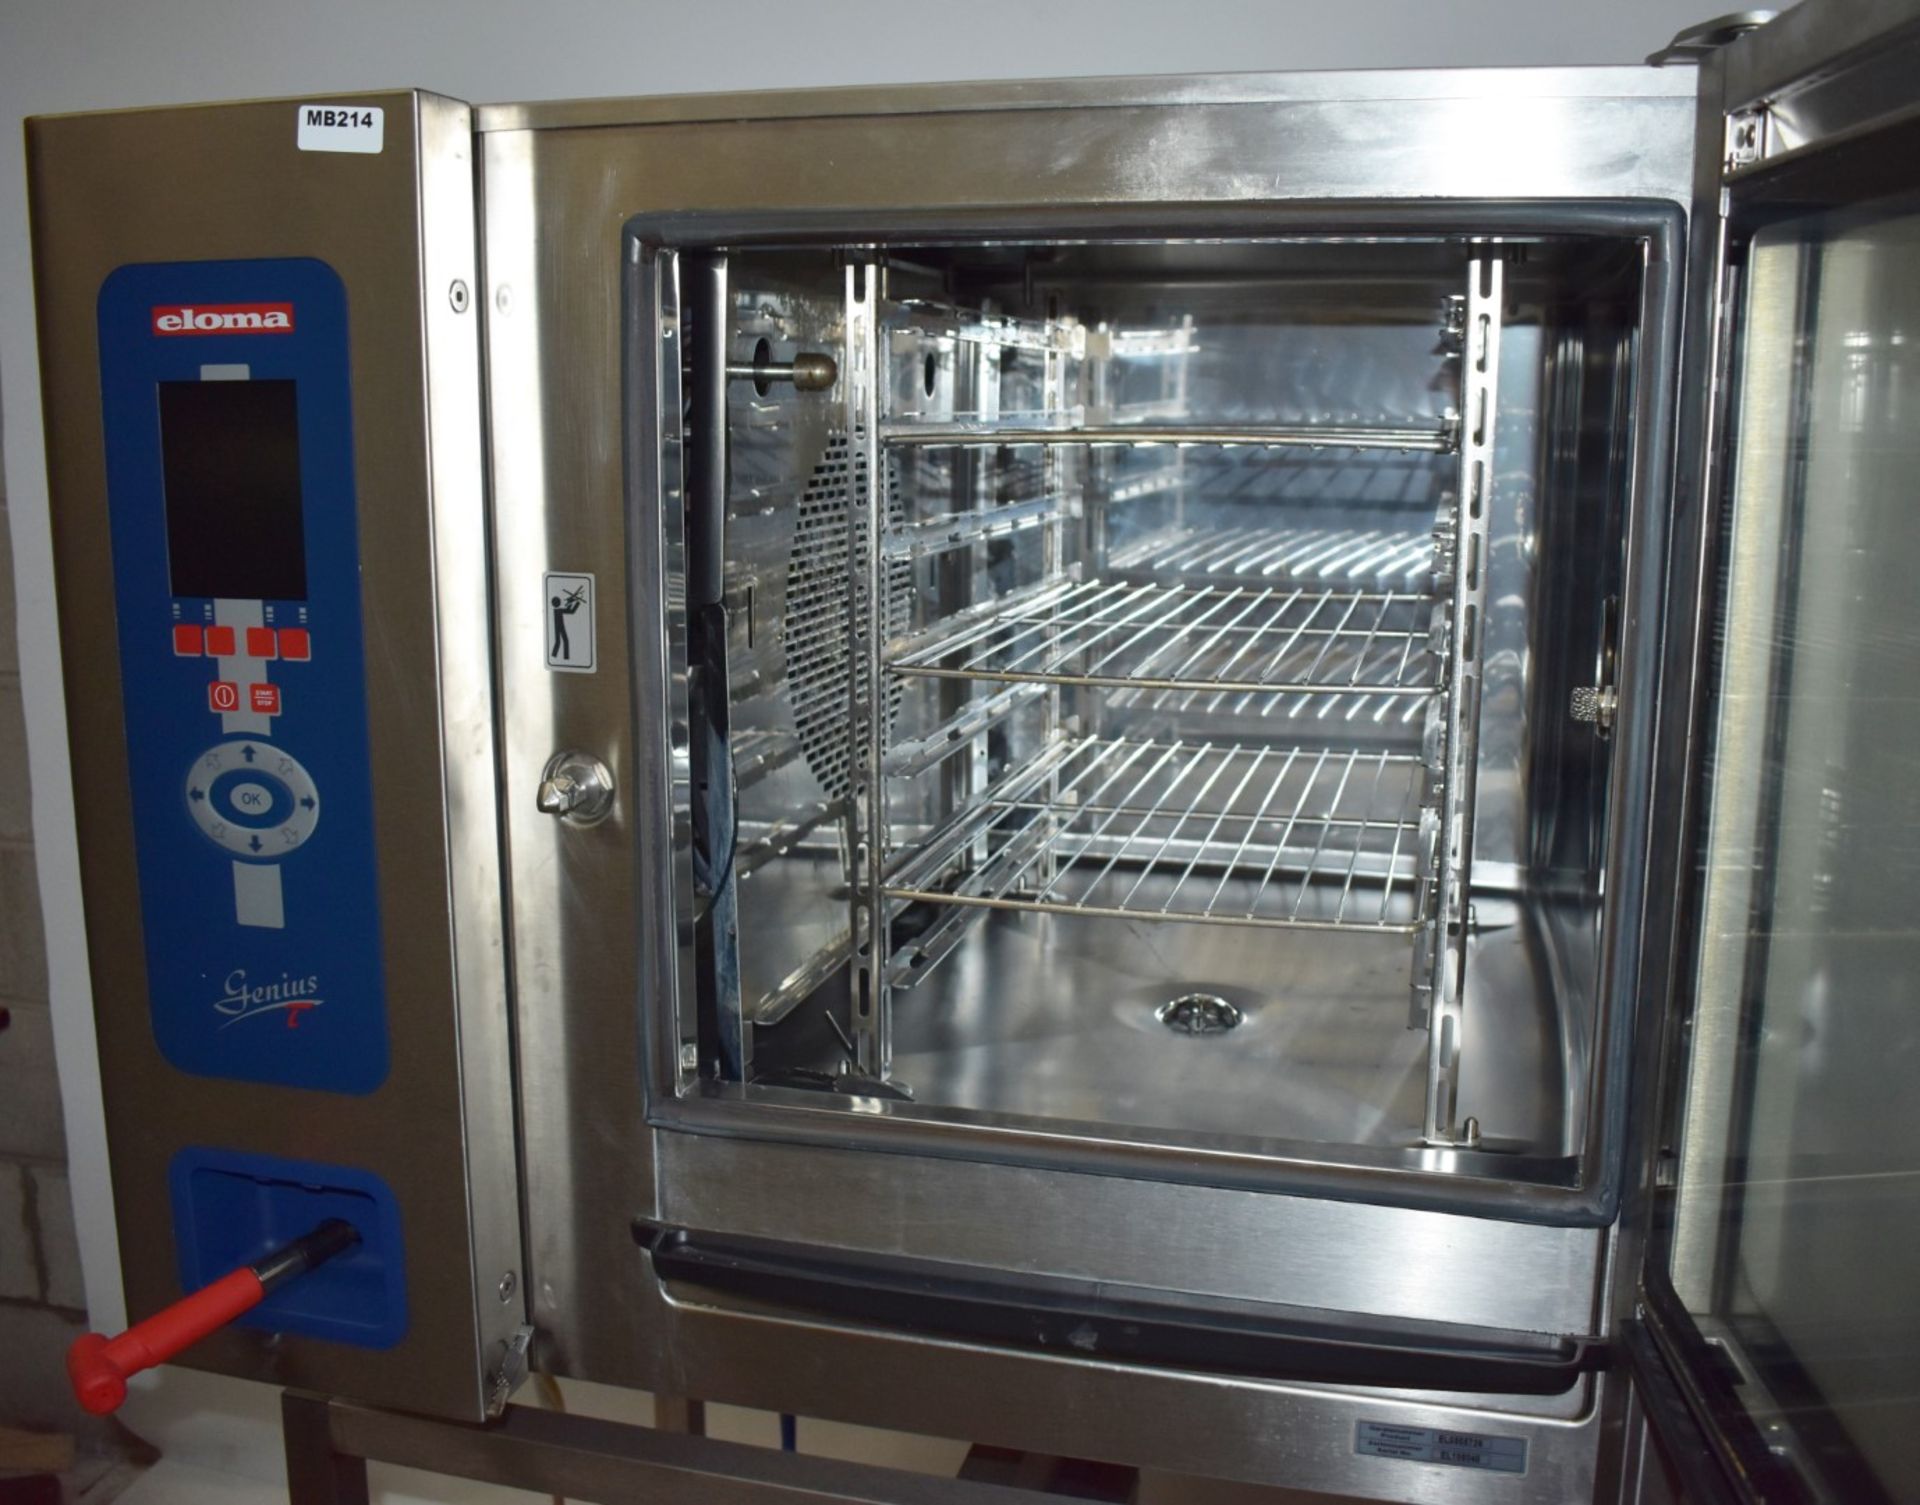 1 x Eloma Genius T 6-11 Combi  Steam 6 Grid Oven - H164 x W93 x D80 cms - 3 Phase Power - CL453 - - Image 13 of 15